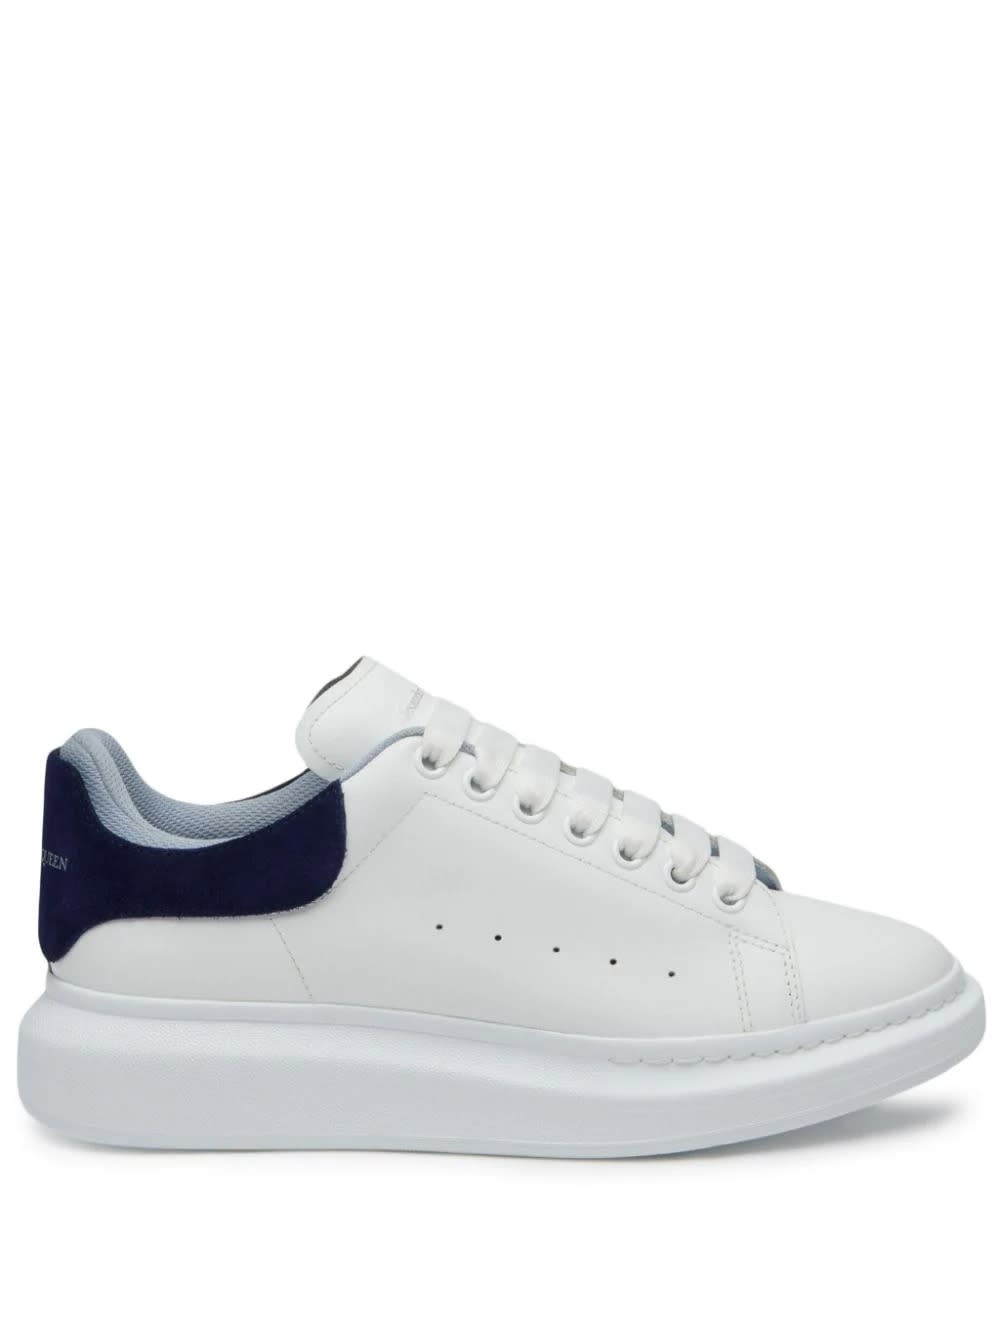 Alexander Mcqueen White Oversized Sneakers With Navy And Light Blue Details